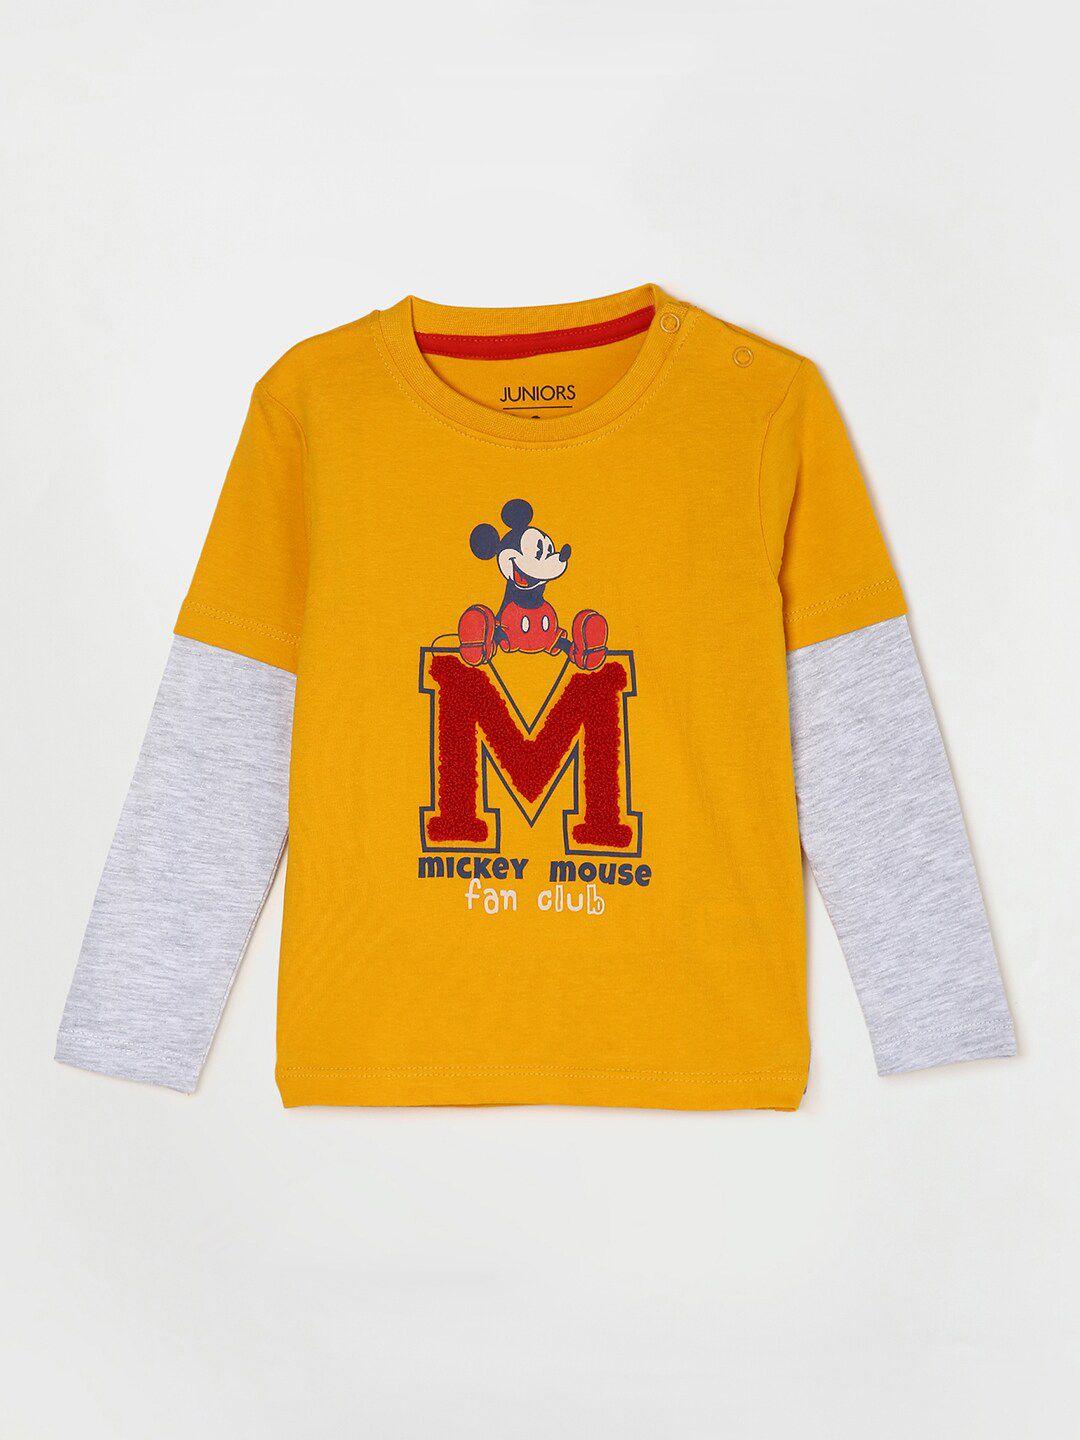 juniors-by-lifestyle-boys-yellow-mickey-mouse-printed-t-shirt